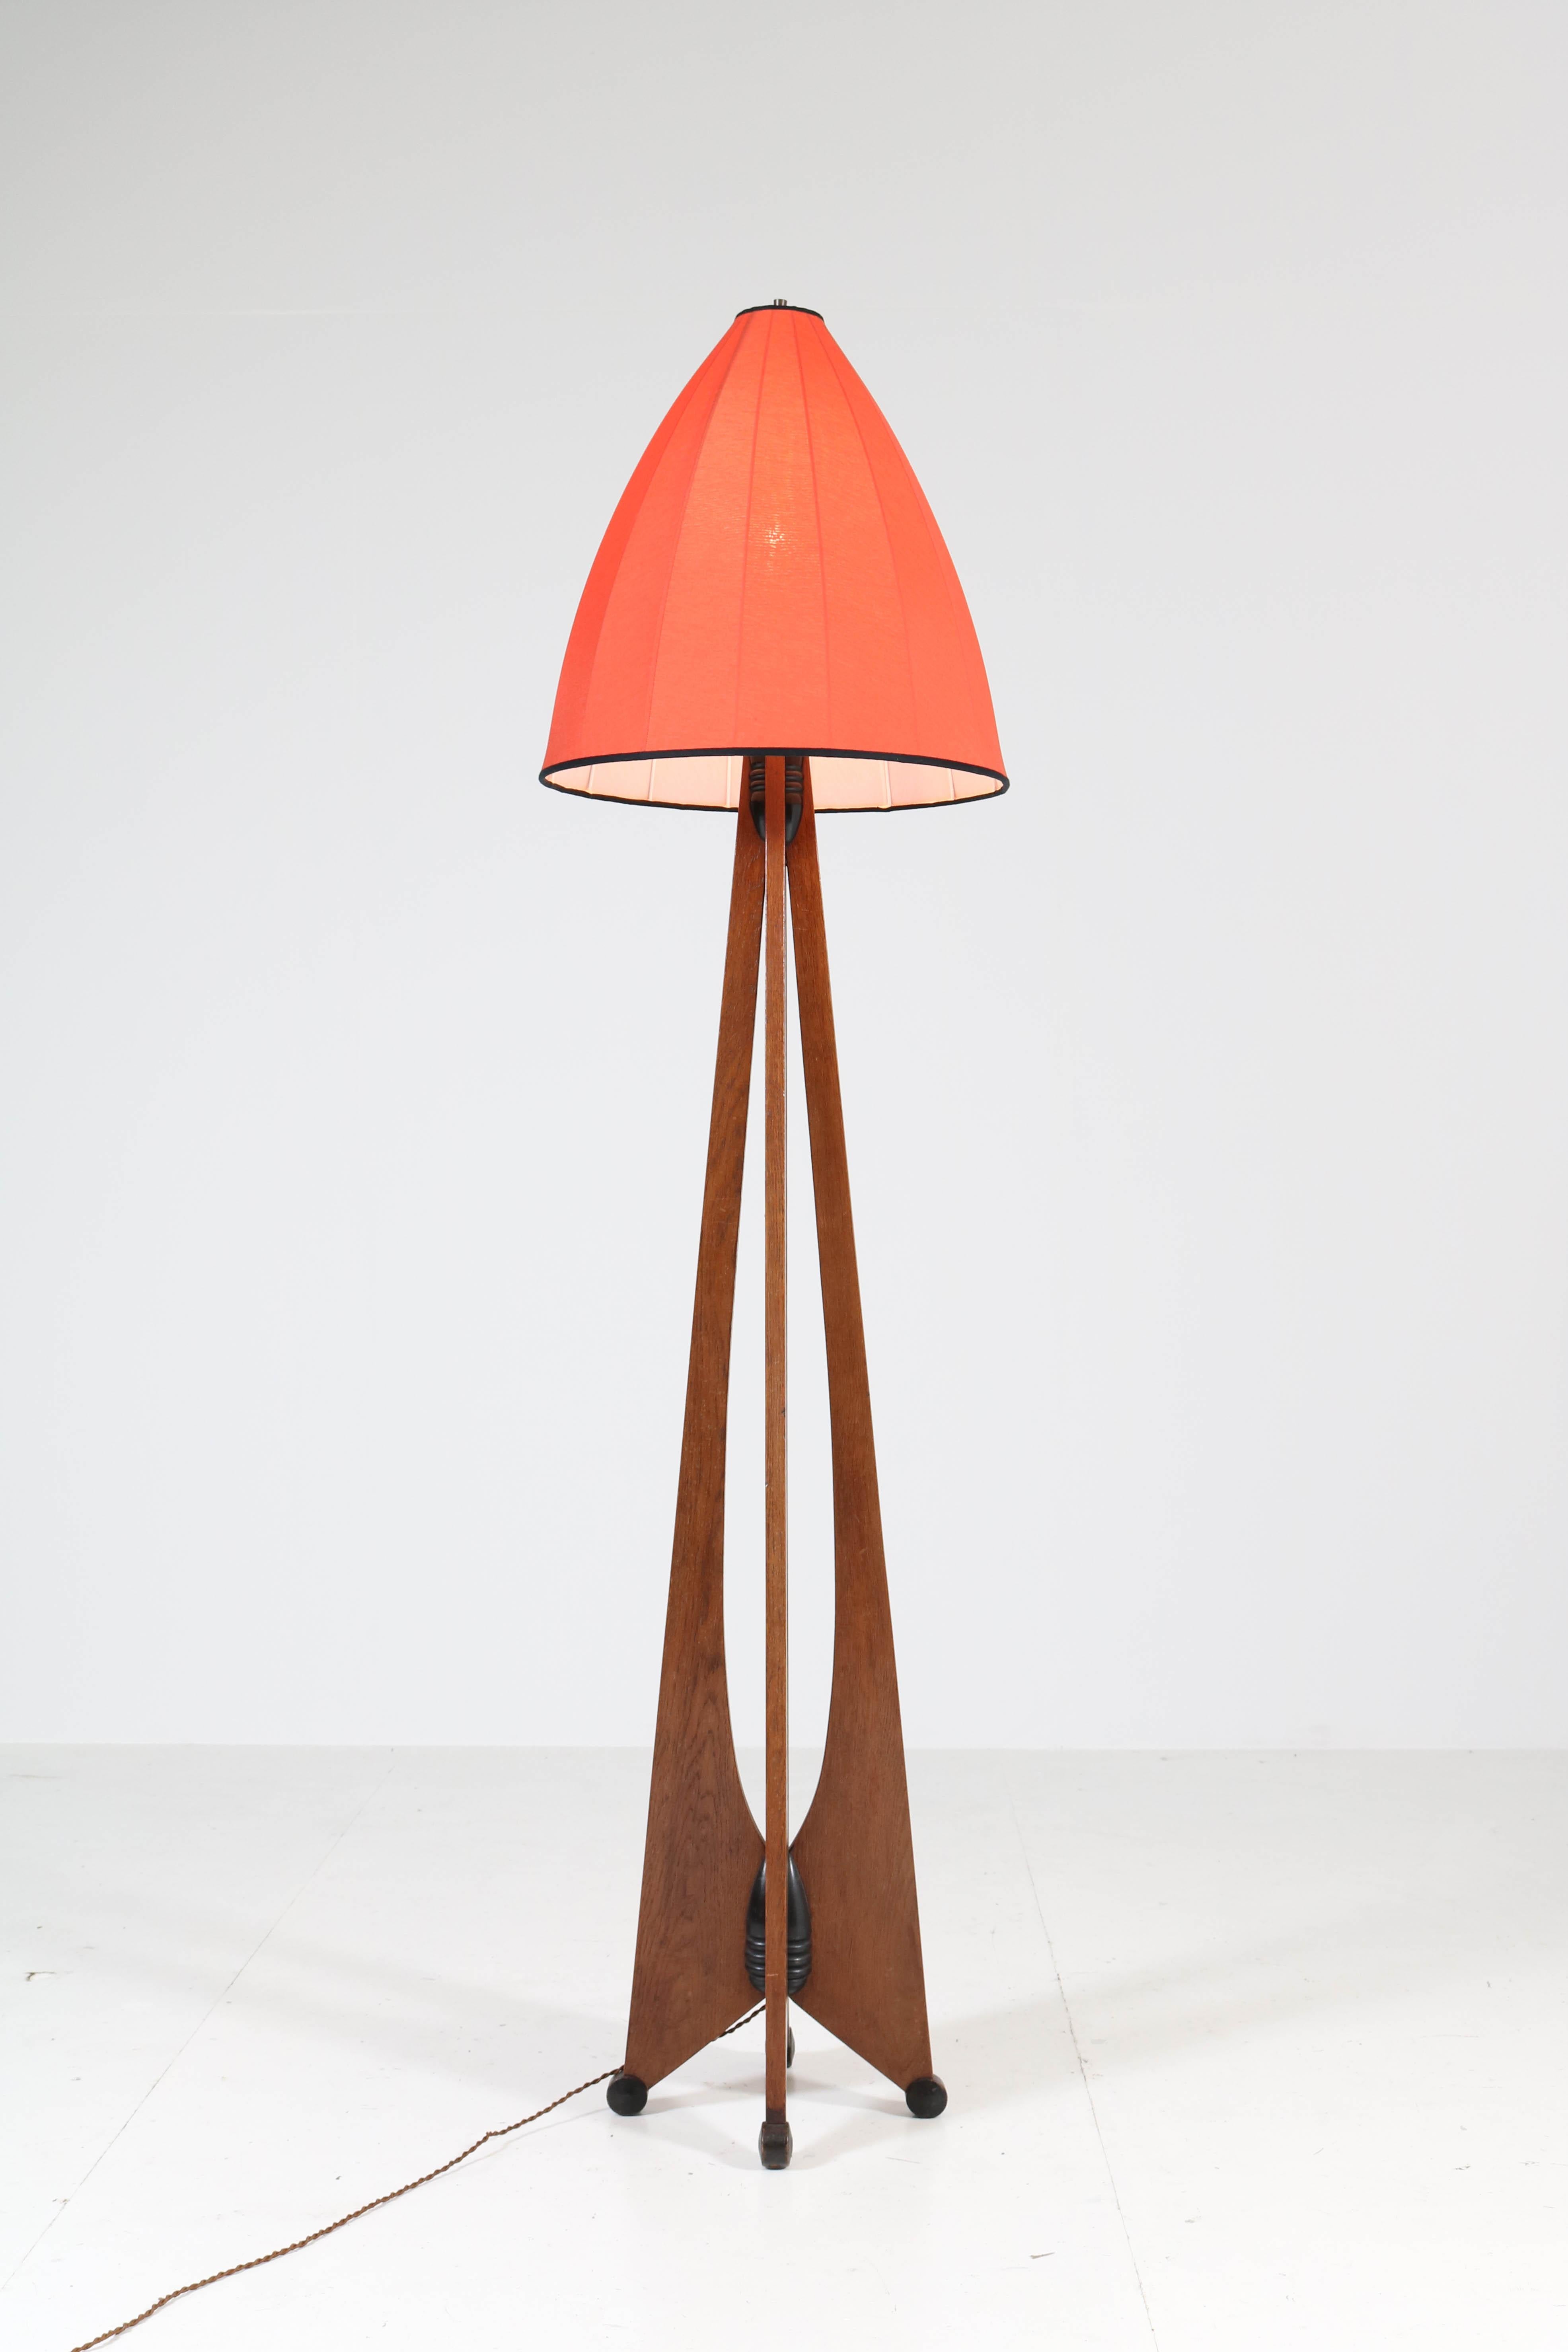 Stunning and rare Art Deco Amsterdam School floor lamp.
Design by J.J. Zijfers, Amsterdam.
Striking Dutch design from the 1920s.
Solid oak with original black lacquered details.
The shantung silk shade is custom made after an original model of